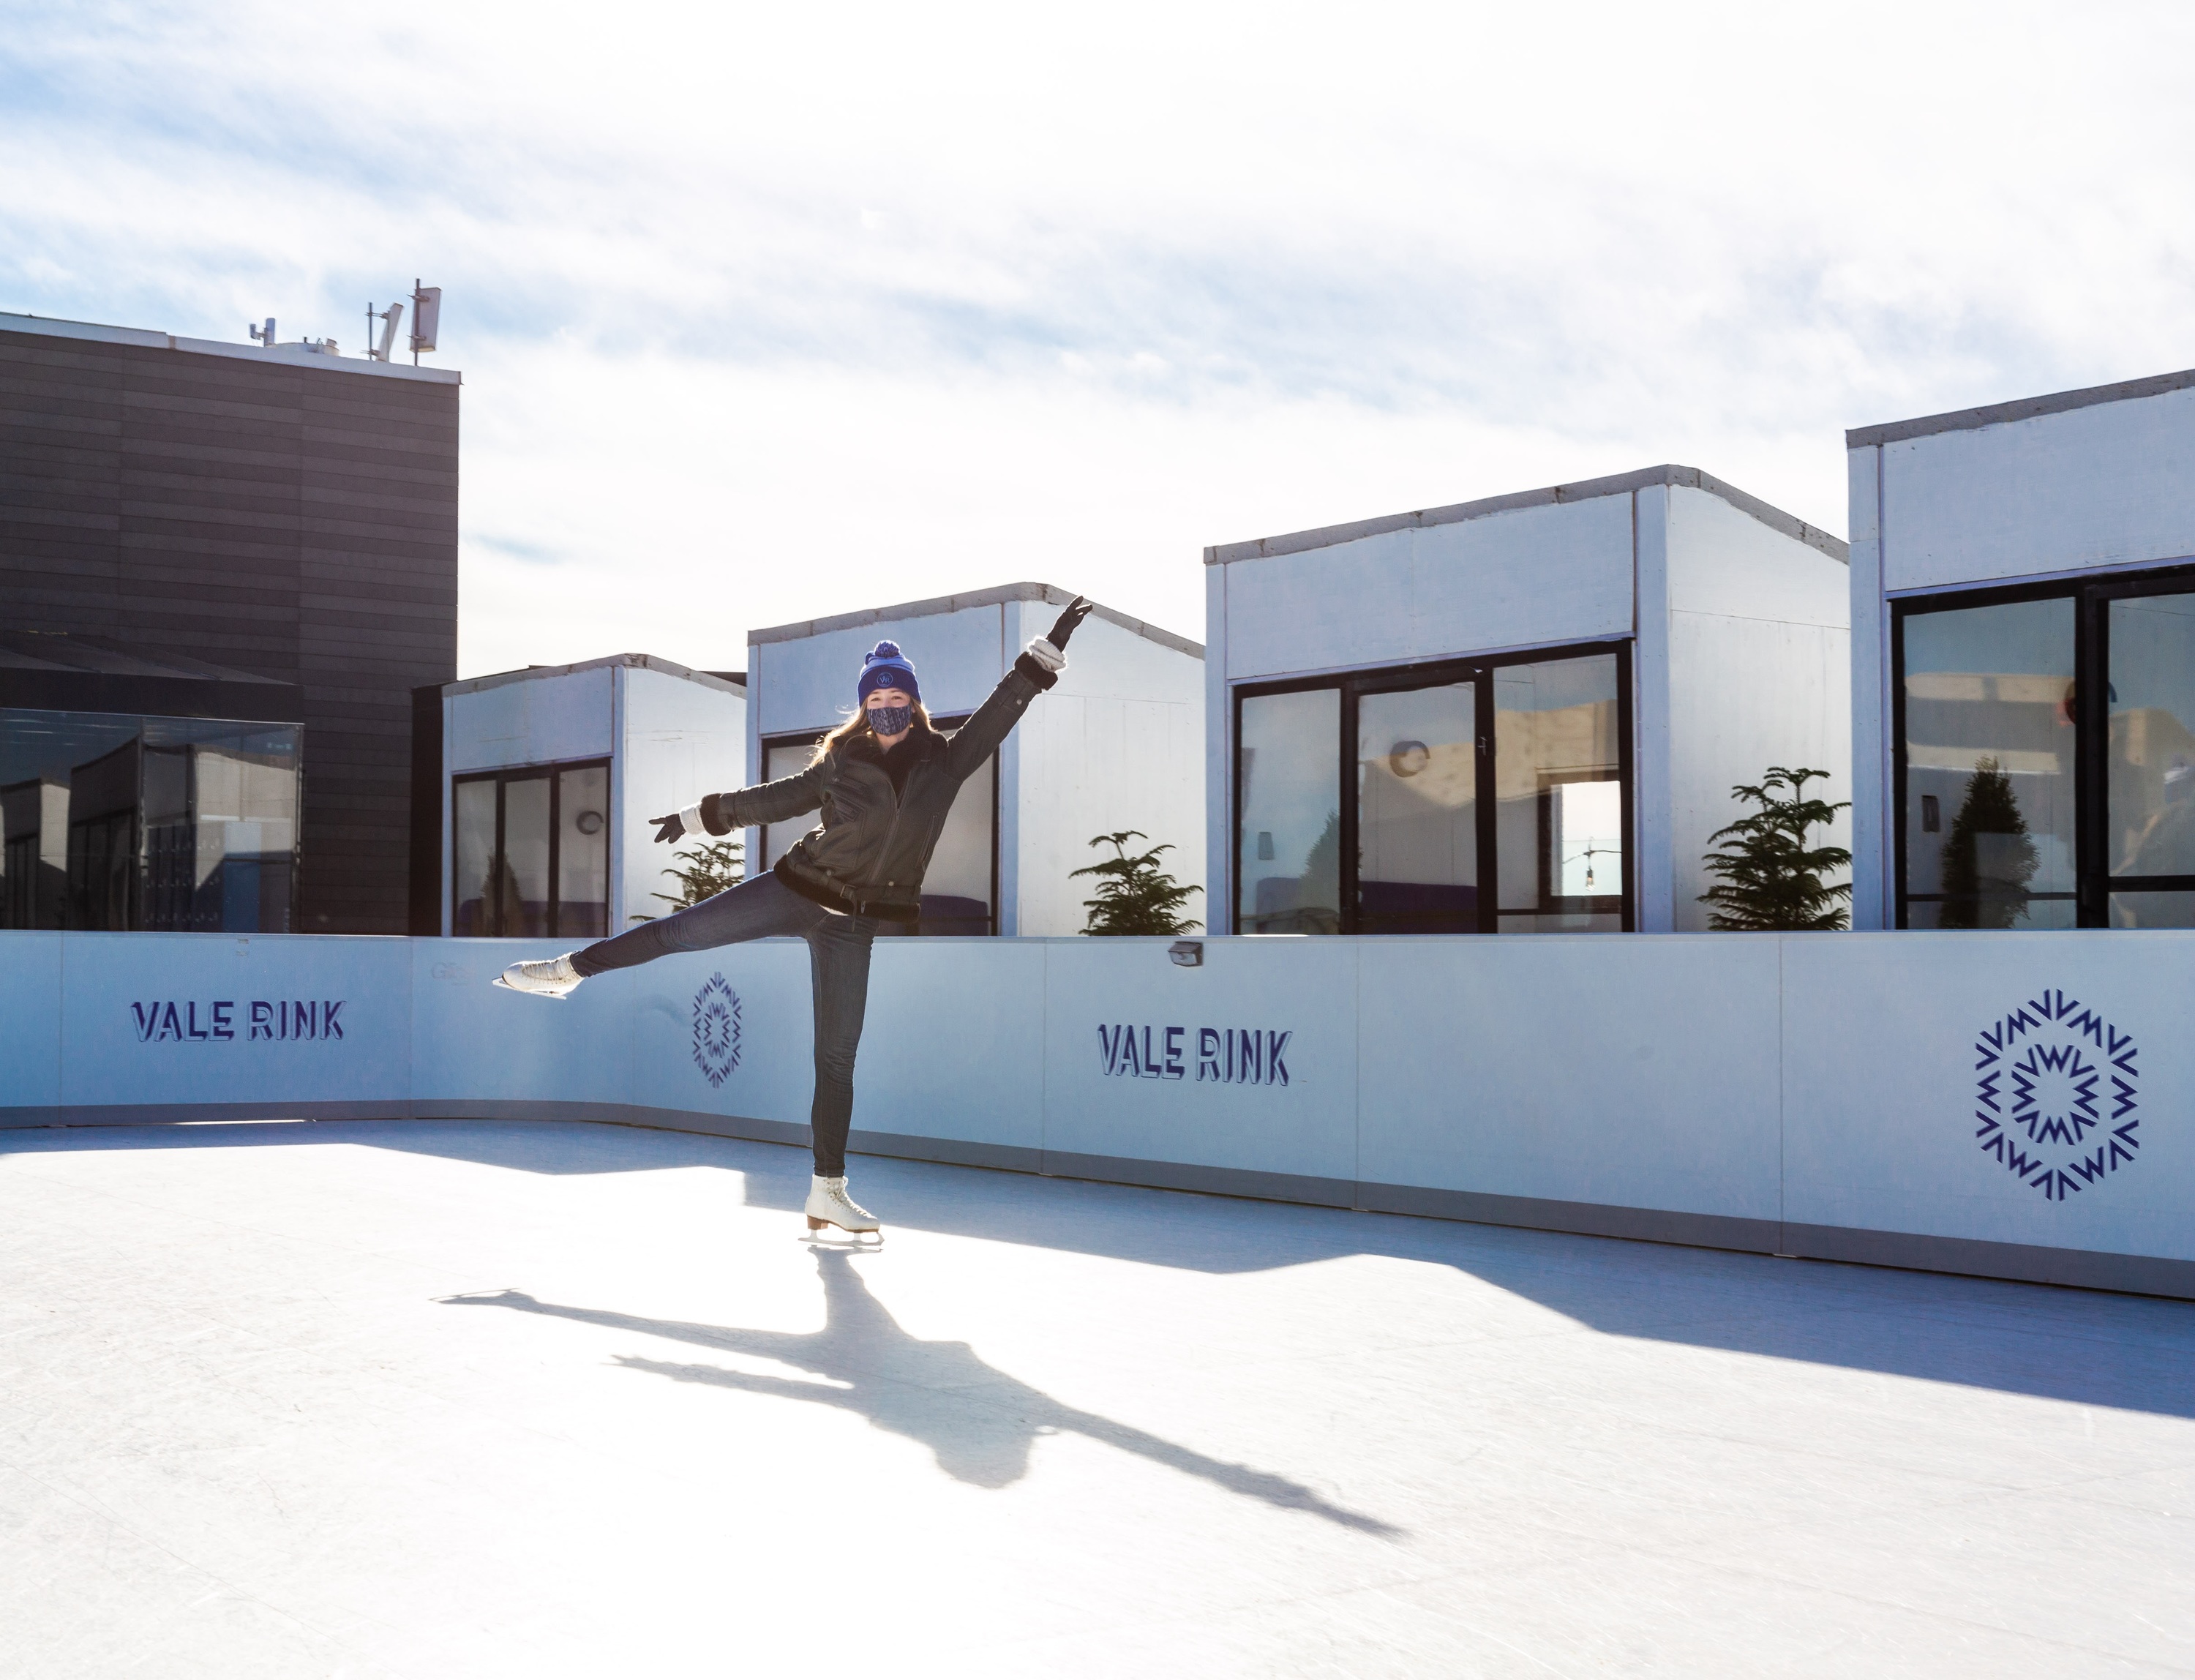 NYC's The William Vale hotel launches a rooftop winter village